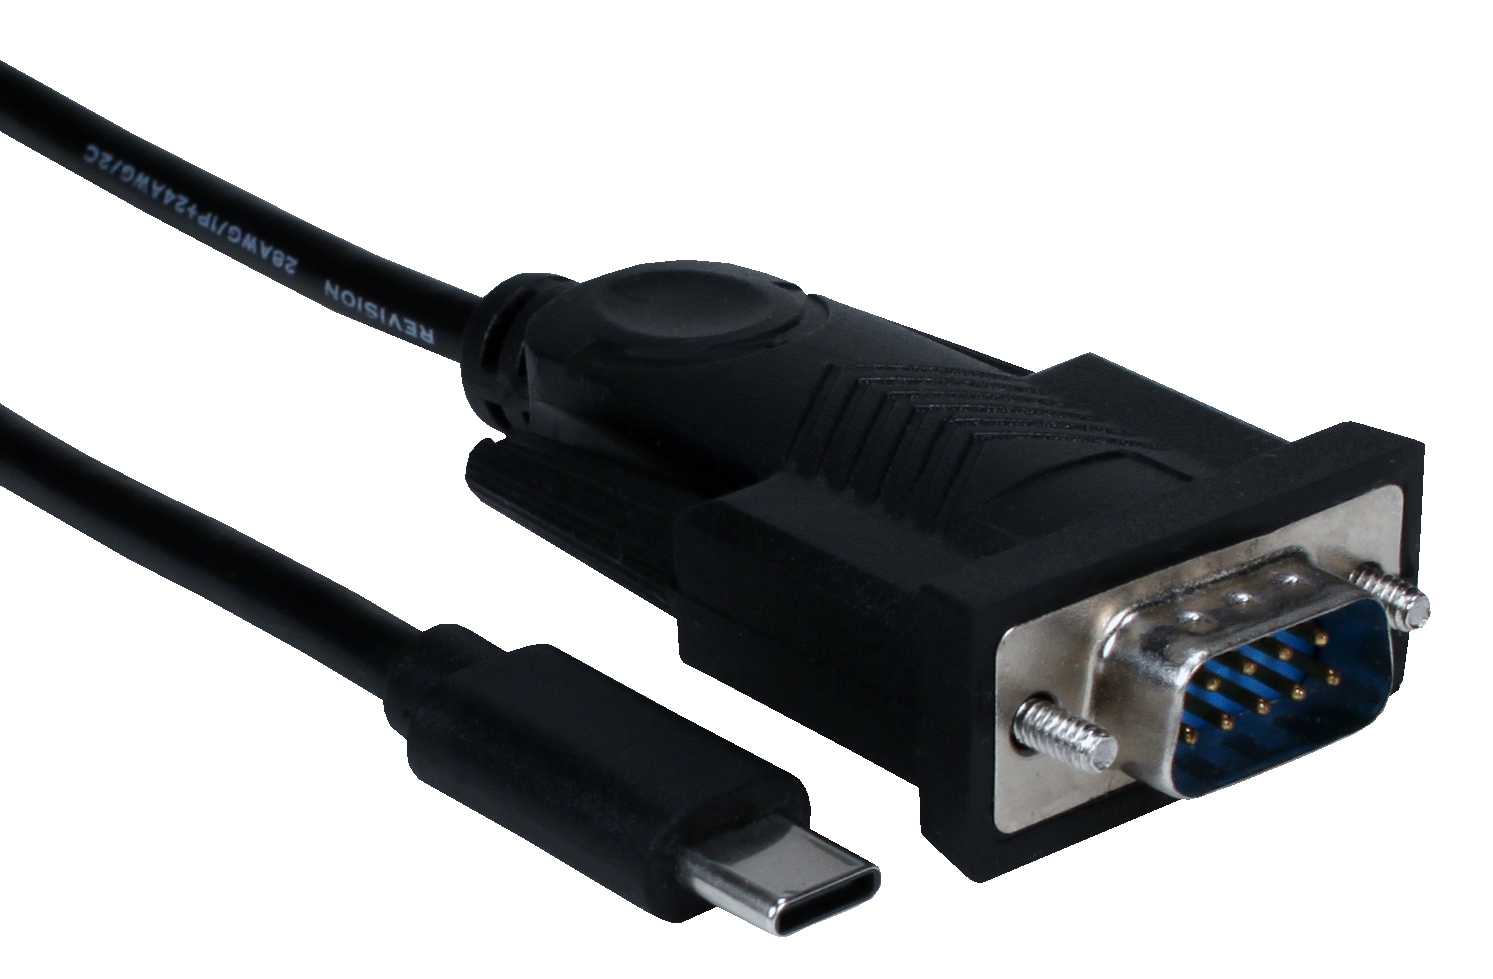 6ft USB-C to DB9 Male RS232 Serial Adaptor Cable UR-2000M2C 037229221213 USB-C to PC Serial RS232 Adaptor, DB9M DTE Connection with Built-in 6ft Cable UC310, UC-232A, UC232A IC188A IC199A-R3 IC138A-R3 UC320 AP1103 Y-105 162719 KV6435 UR2000M2C UR-2000M2C adapters adaptors cables feet foot